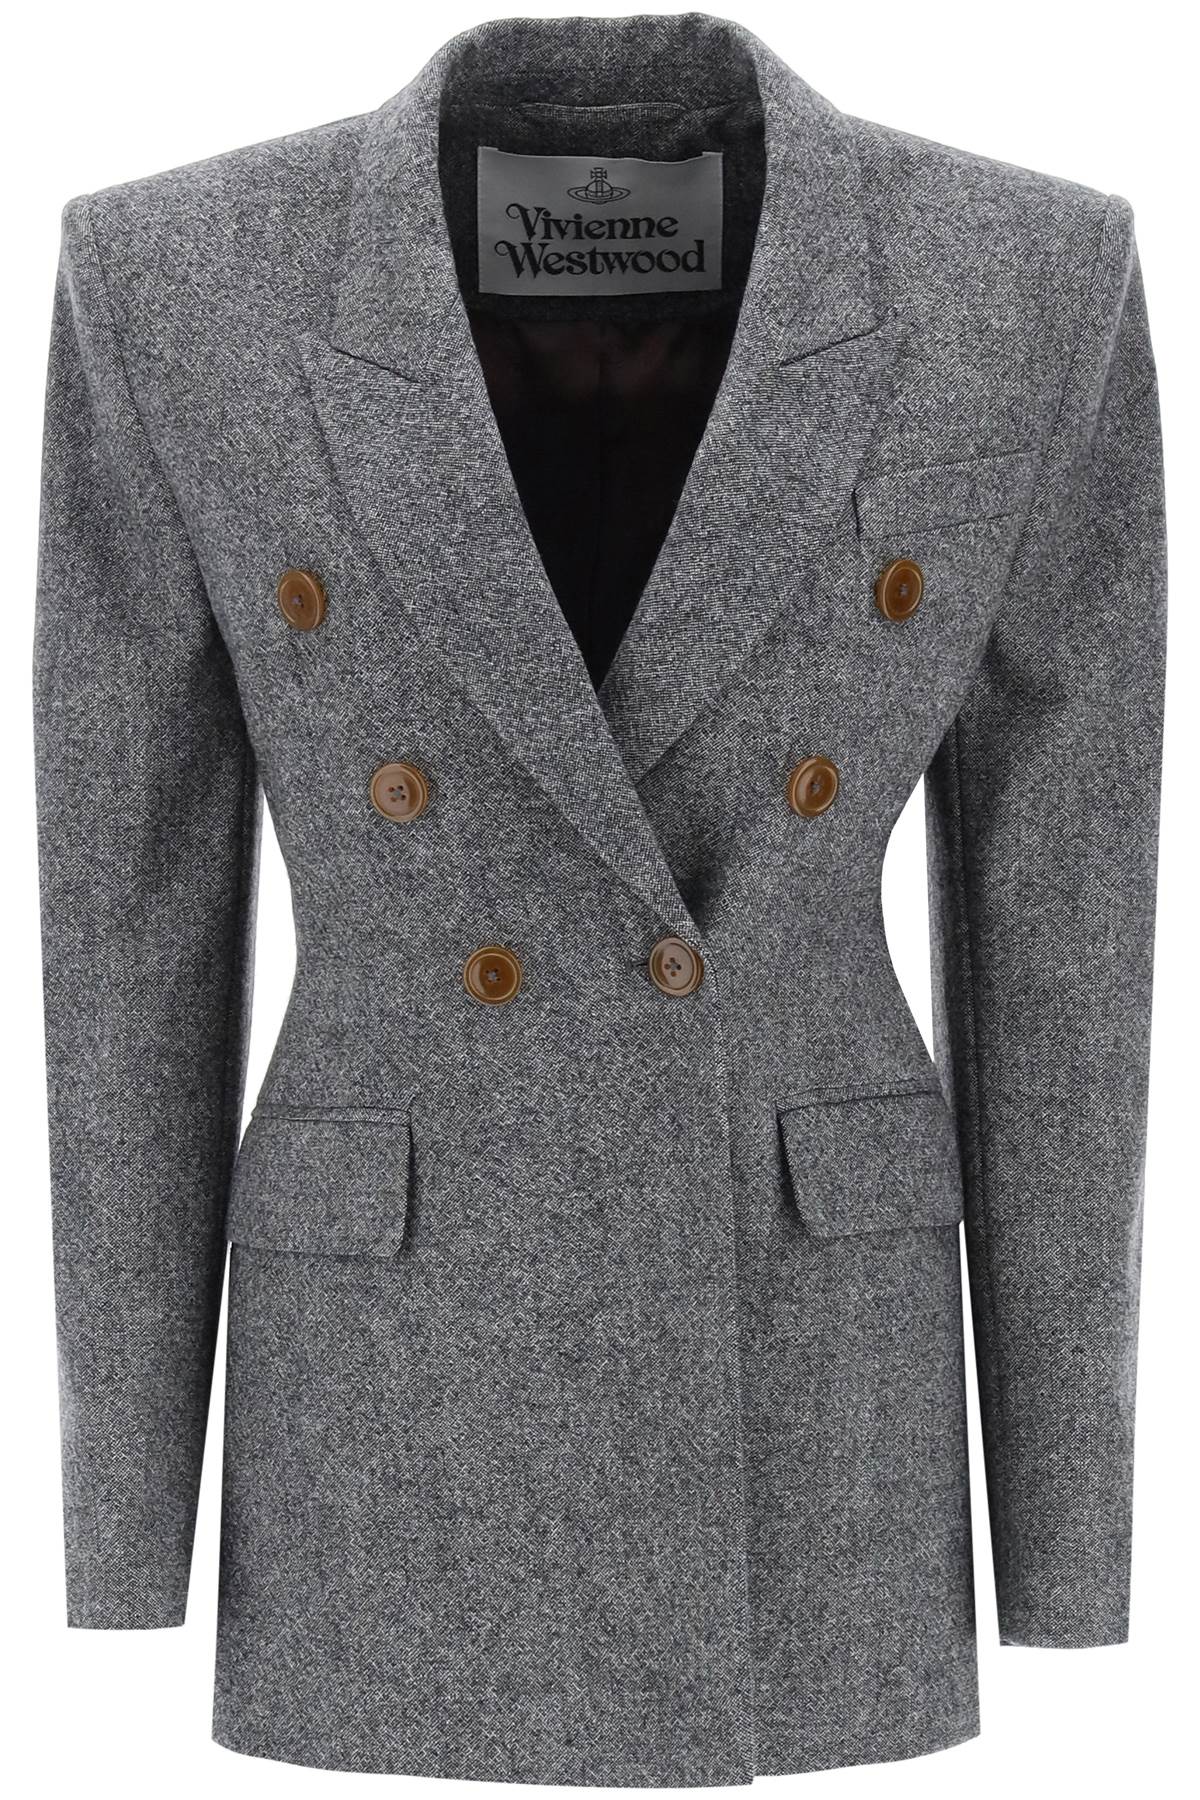 VIVIENNE WESTWOOD Luxurious Women's Tweed Jacket in Mixed Colors for FW23